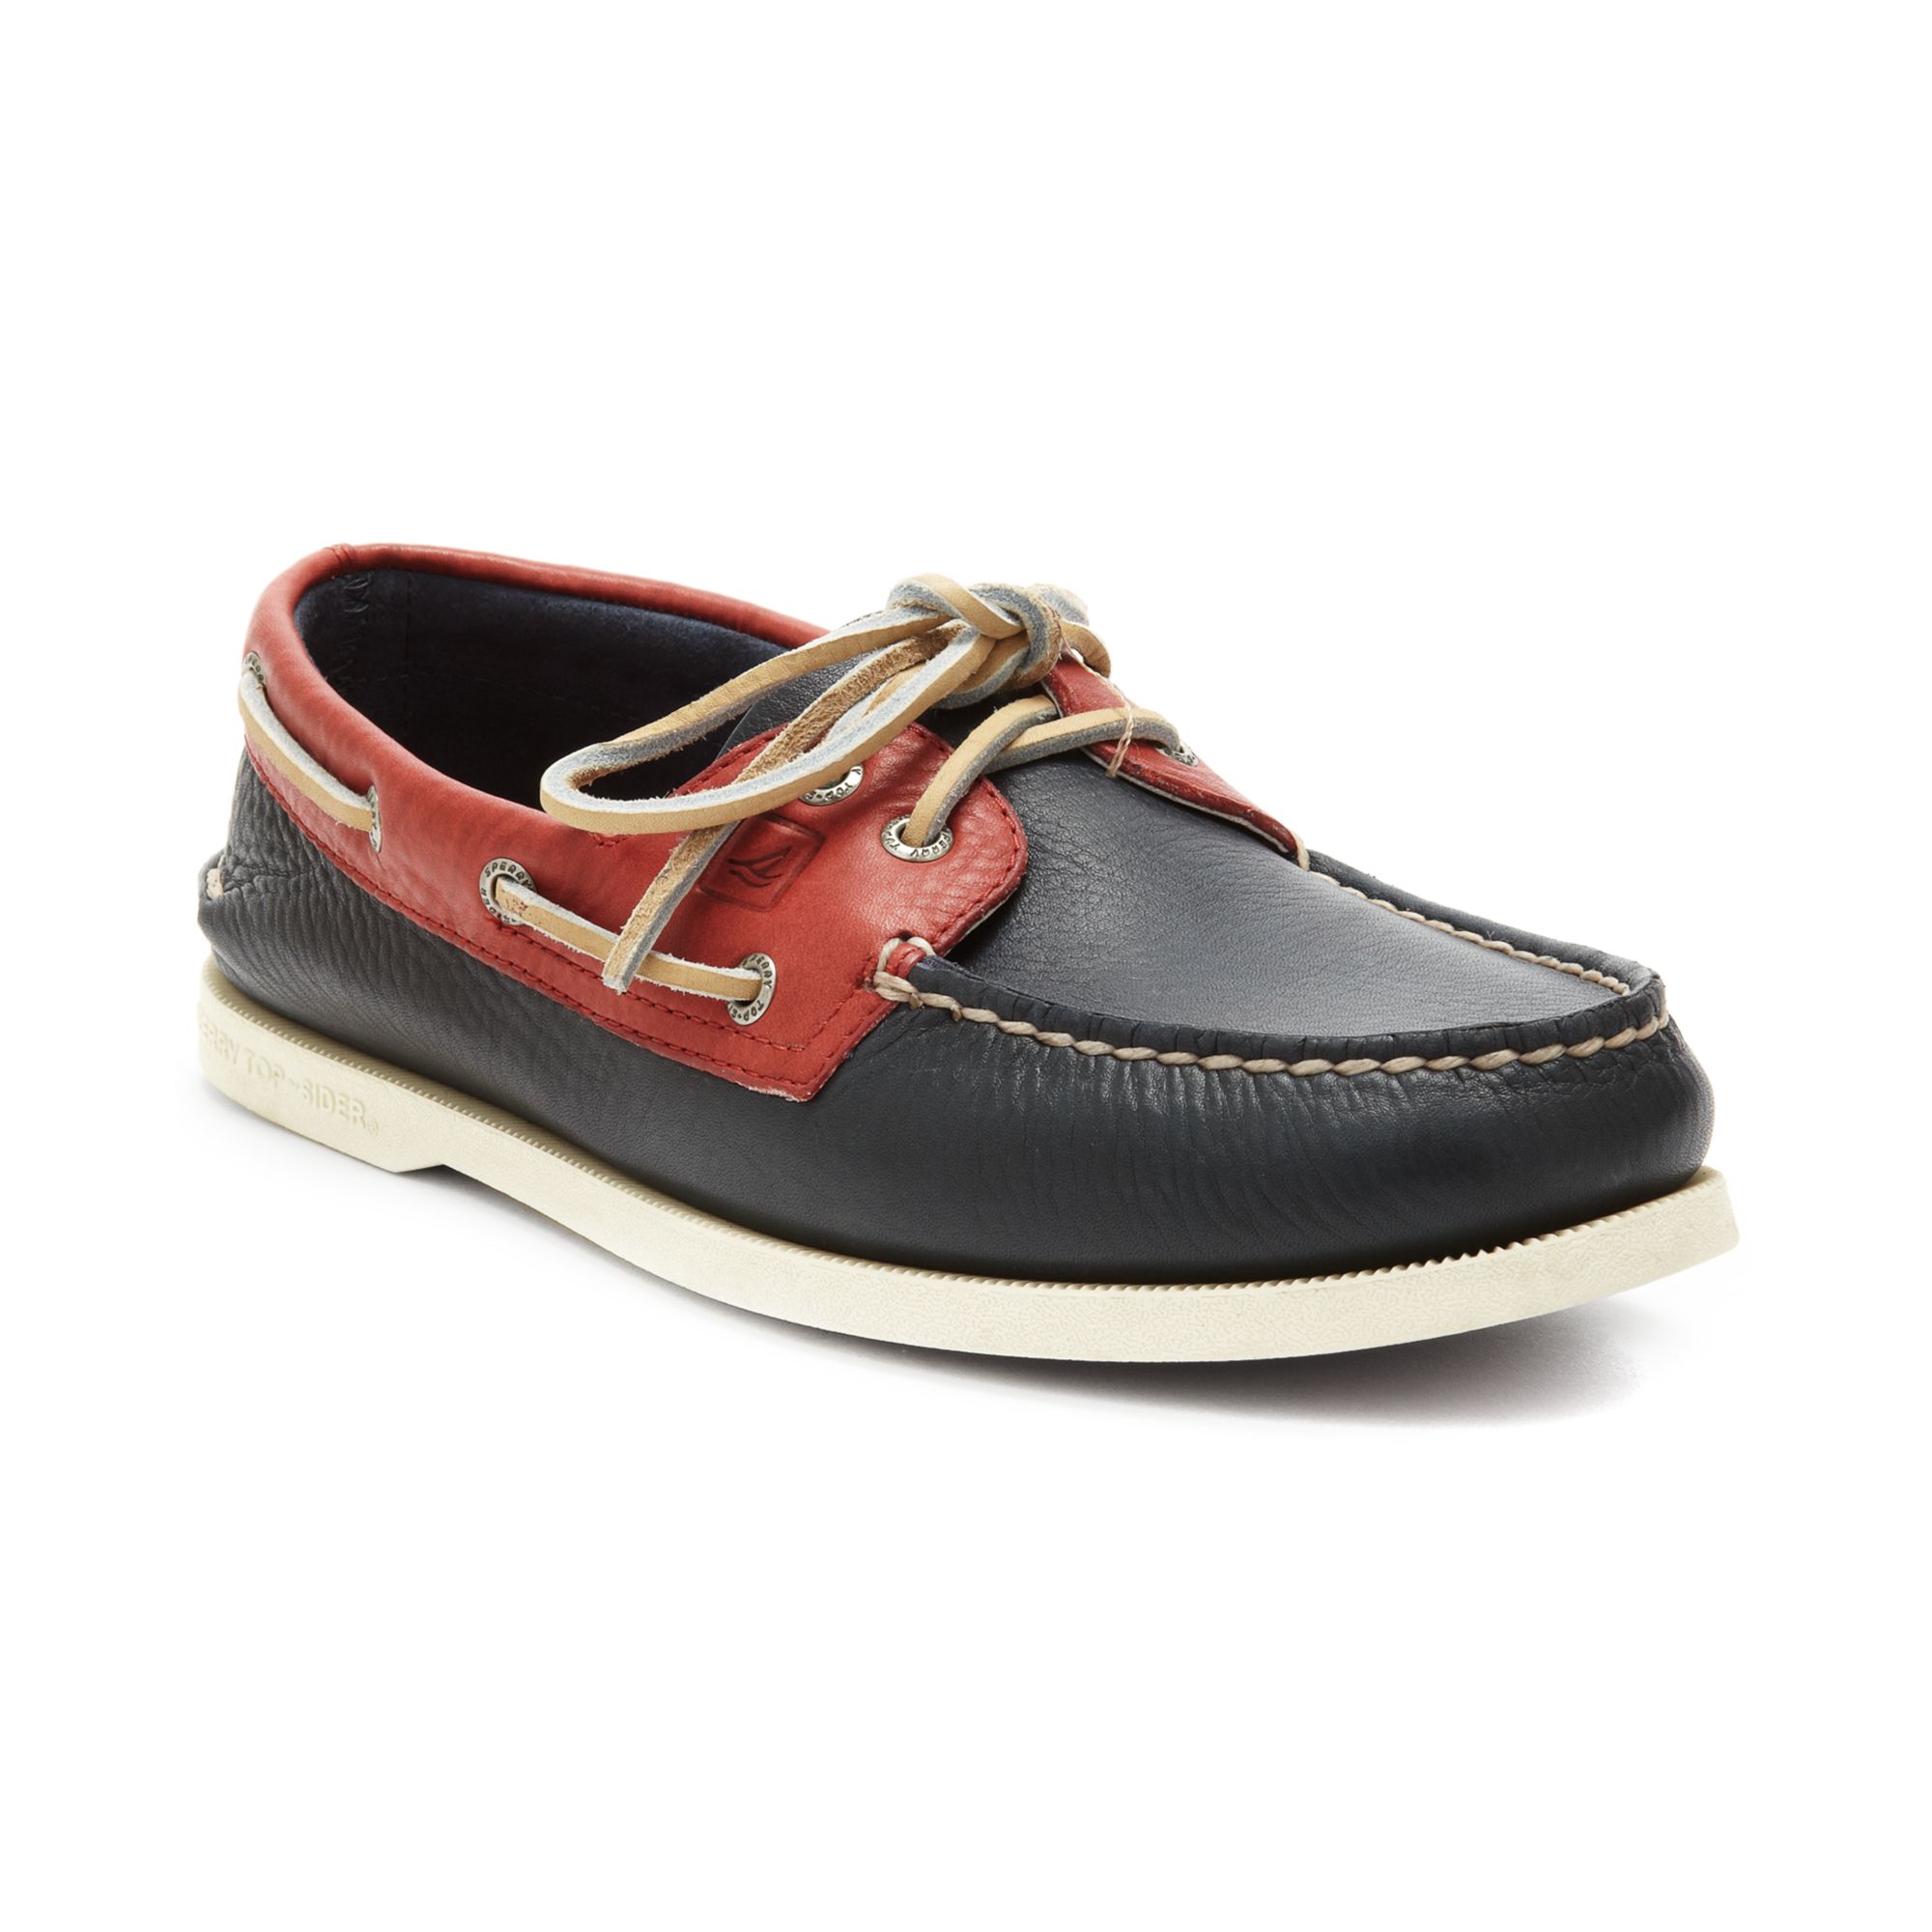 Sperry Top-Sider 2 Eye Relaxed Boat Shoes in Navy/Red (Blue) for Men - Lyst